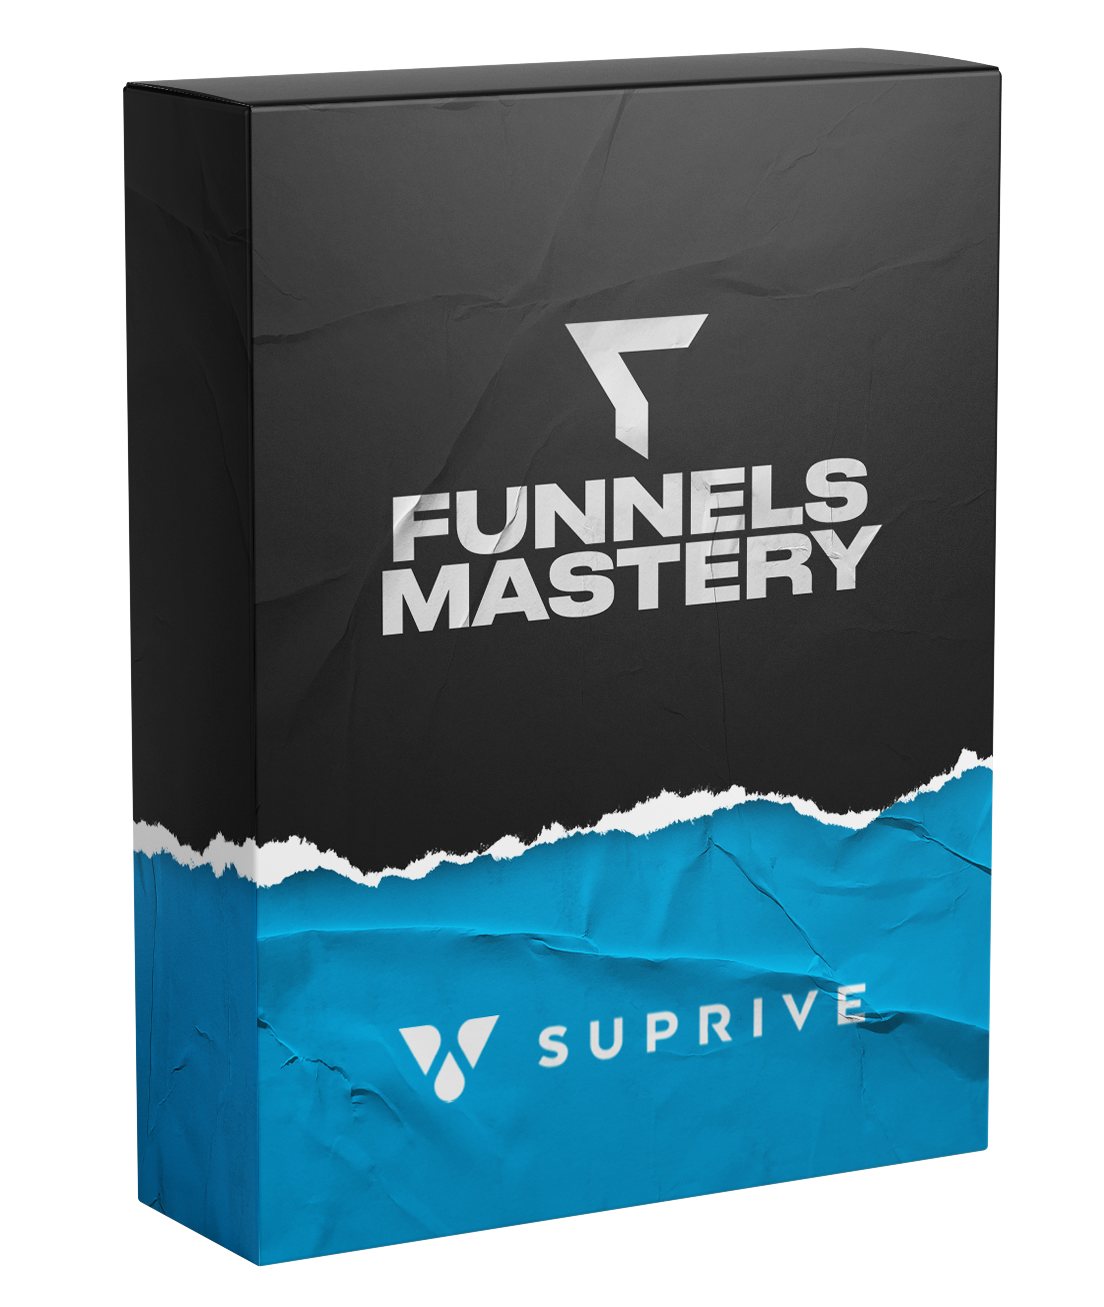 MOCKUP-CAJA-FUNNELS-MASTERY---Small.png